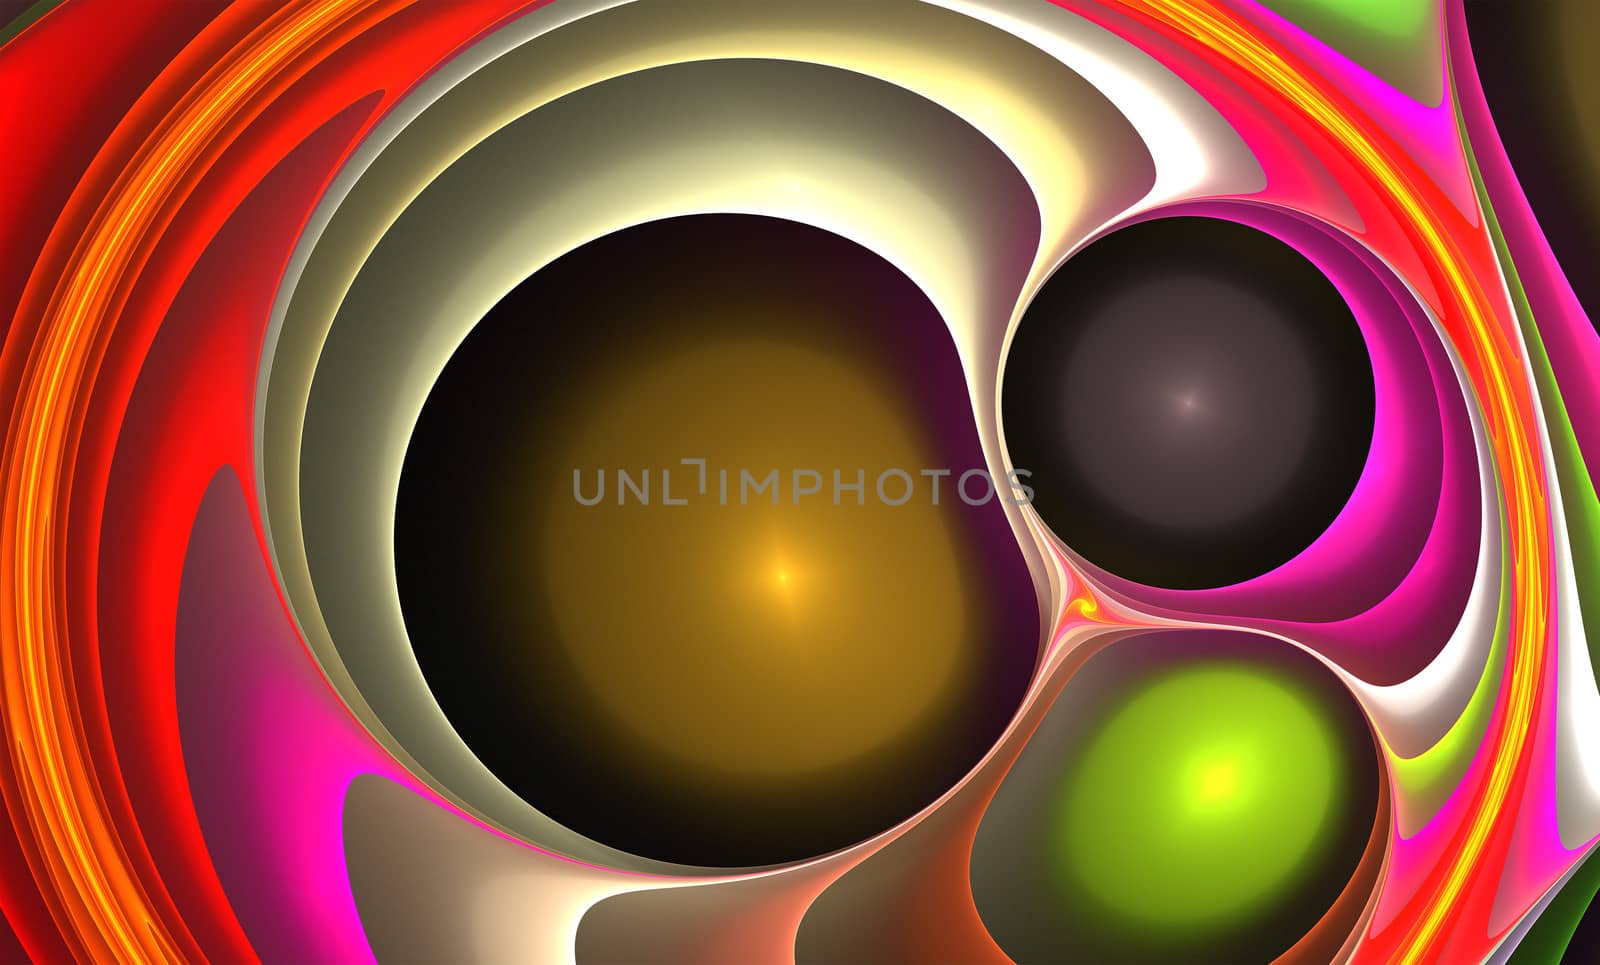  Abstract light background, best viewed many details when viewed at full size